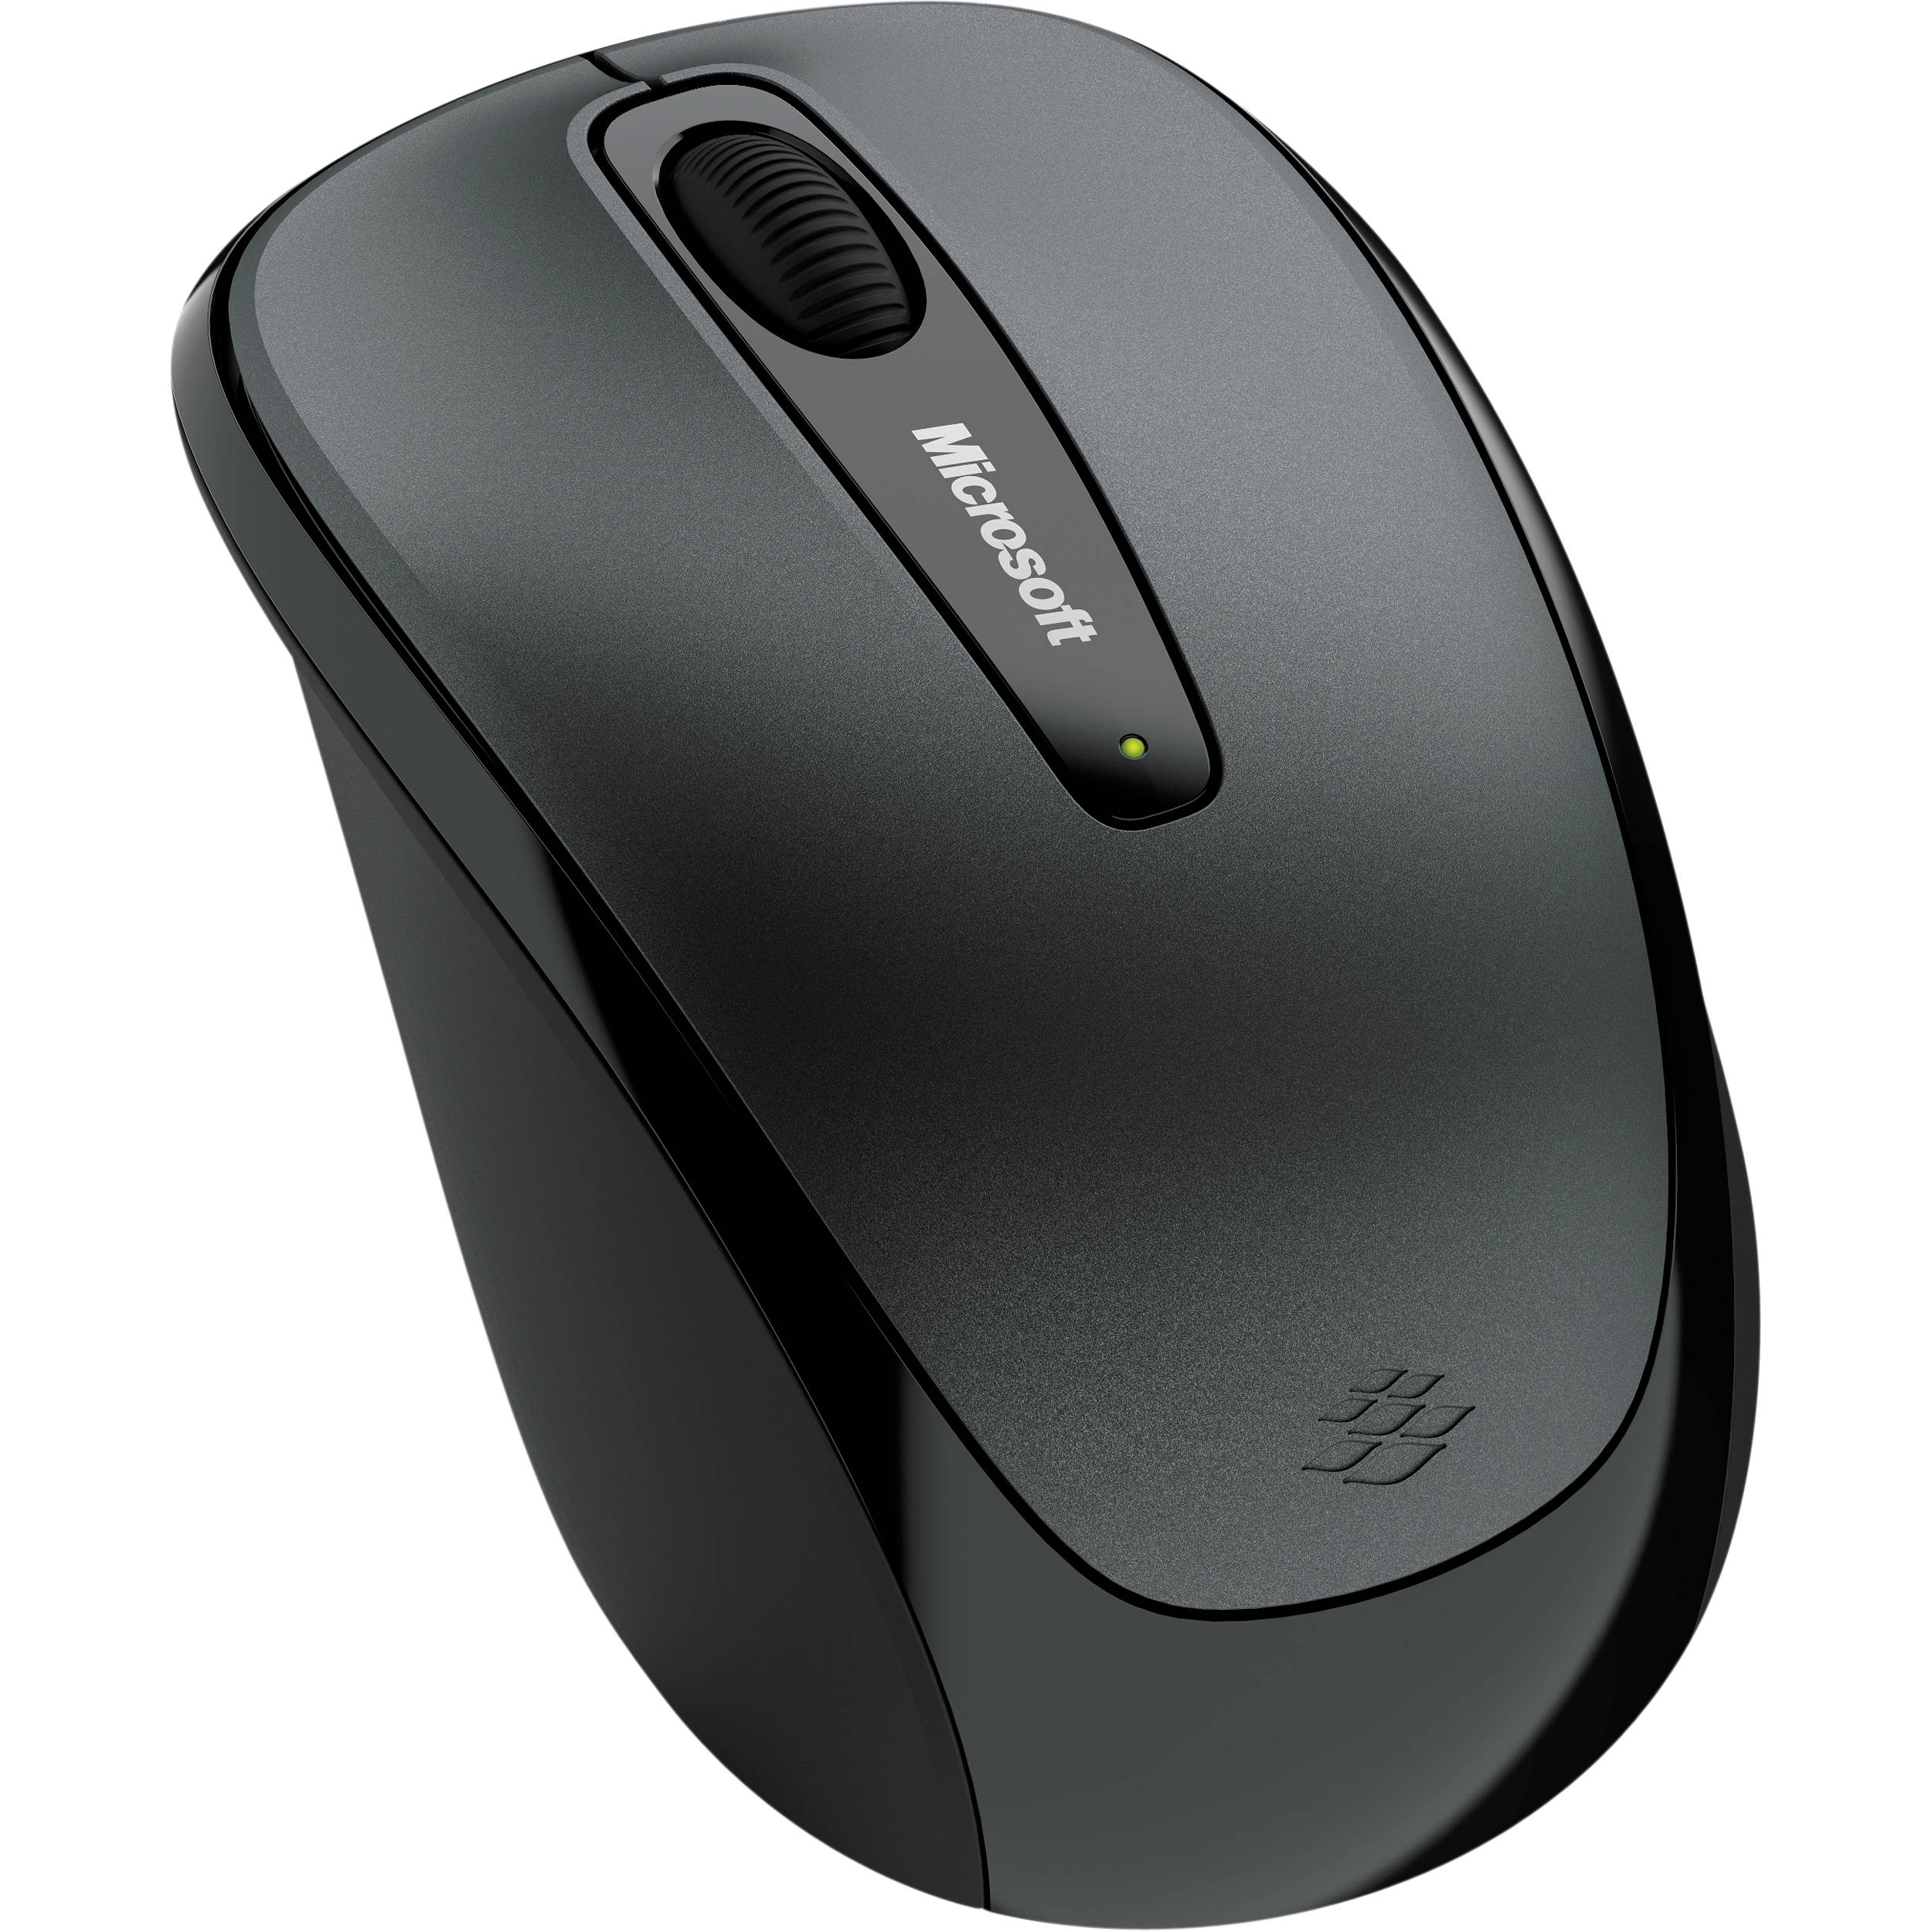 Microsoft Wireless Mobile Mouse 3500 Image - Microsoft Wireless Mobile Mouse - HD Wallpaper 